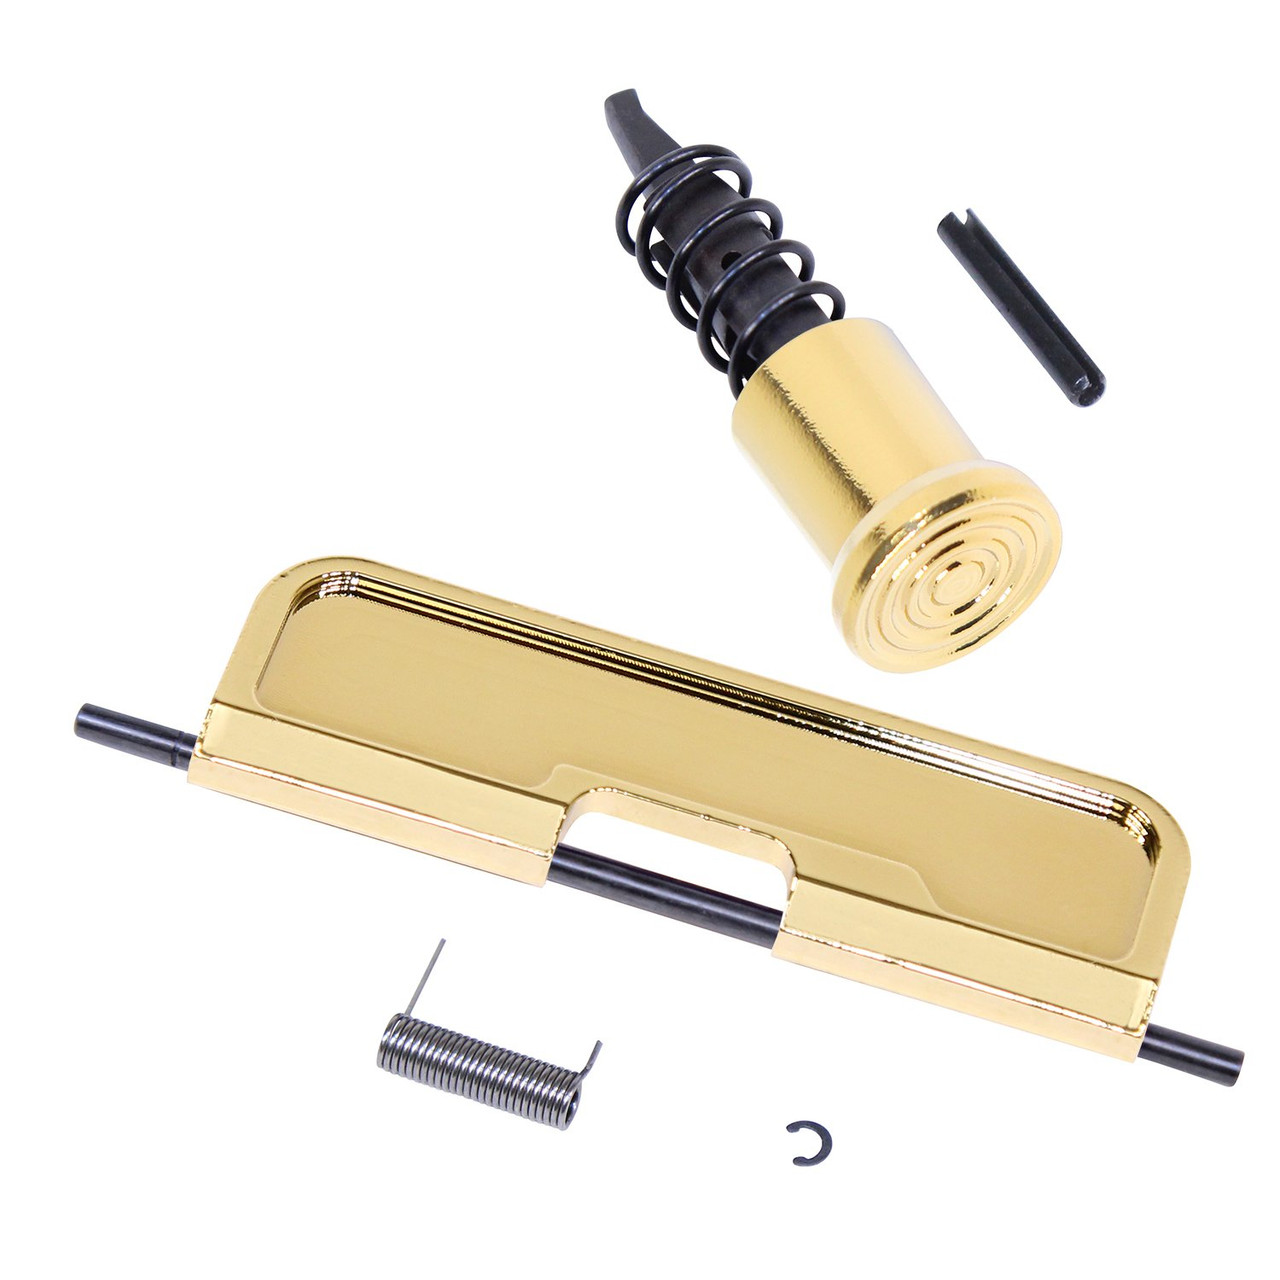 Guntec USA 223UPPER-CKIT-G3-GP AR-15 Upper Completion Kit With Gen 3 Dust Cover (Gold Plated)